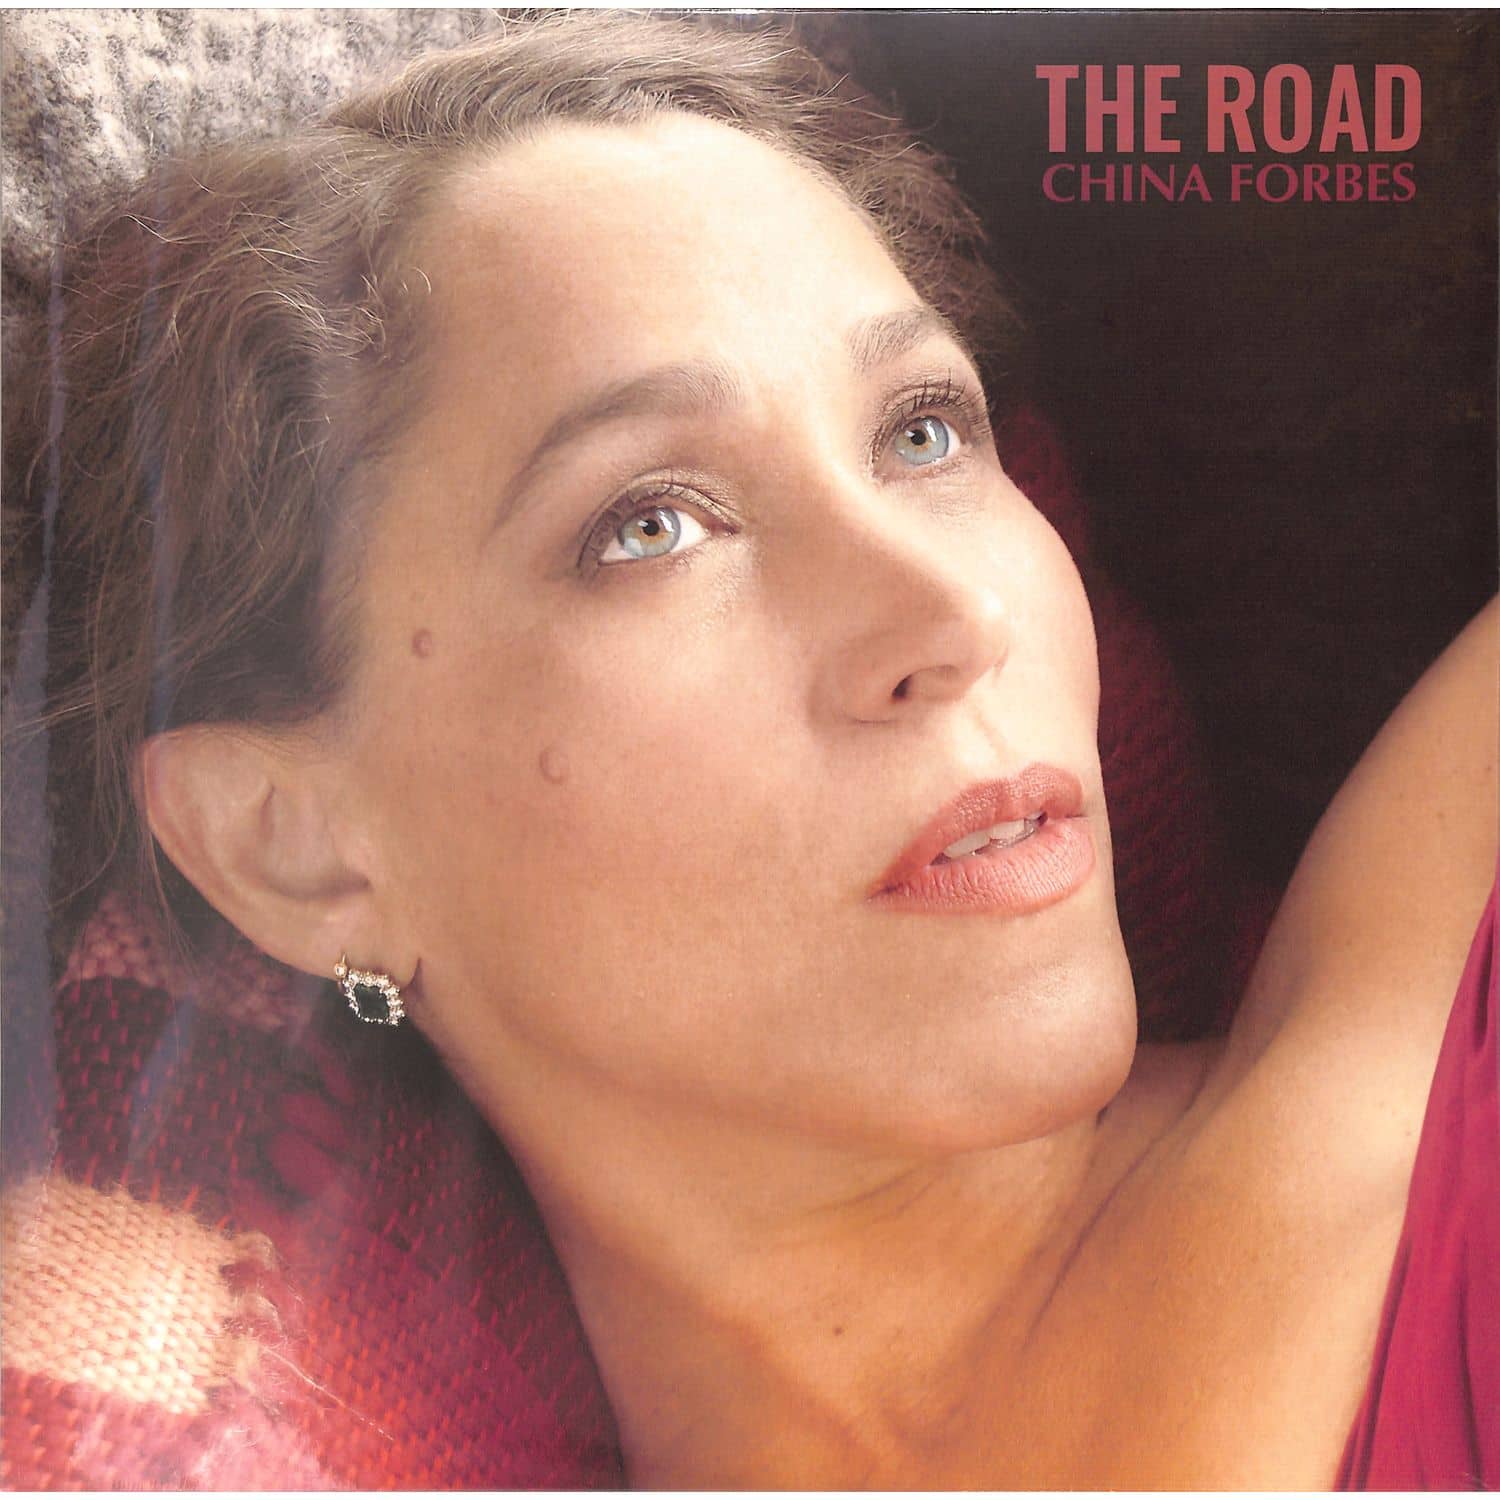 China Forbes - THE ROAD 